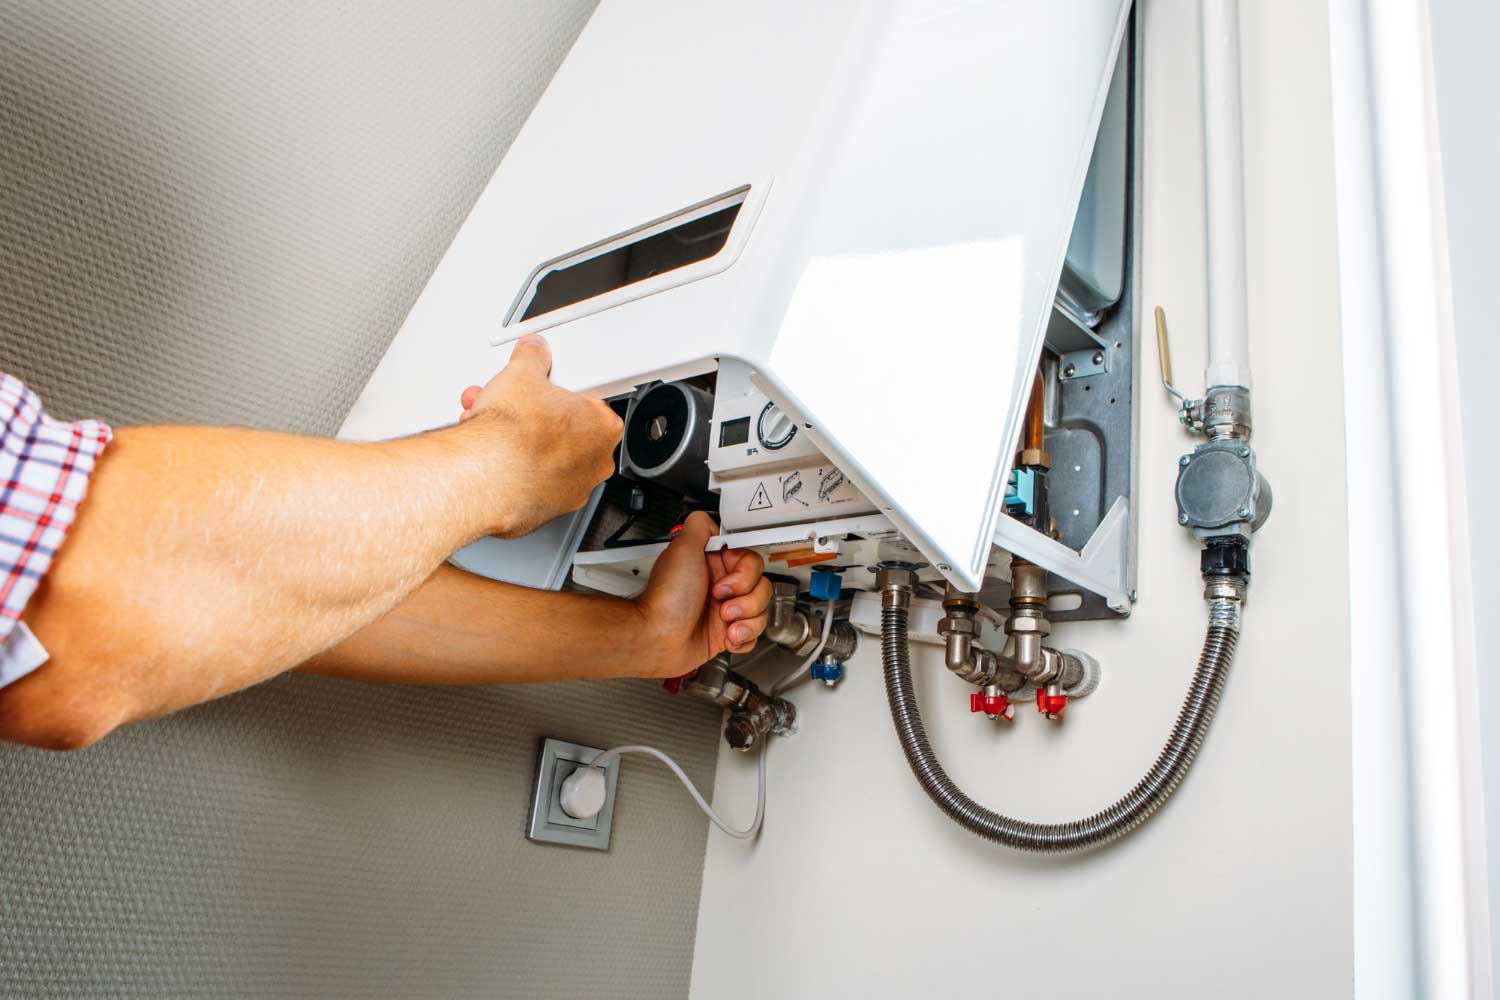 Look for the best boiler service supplier in Middlesex